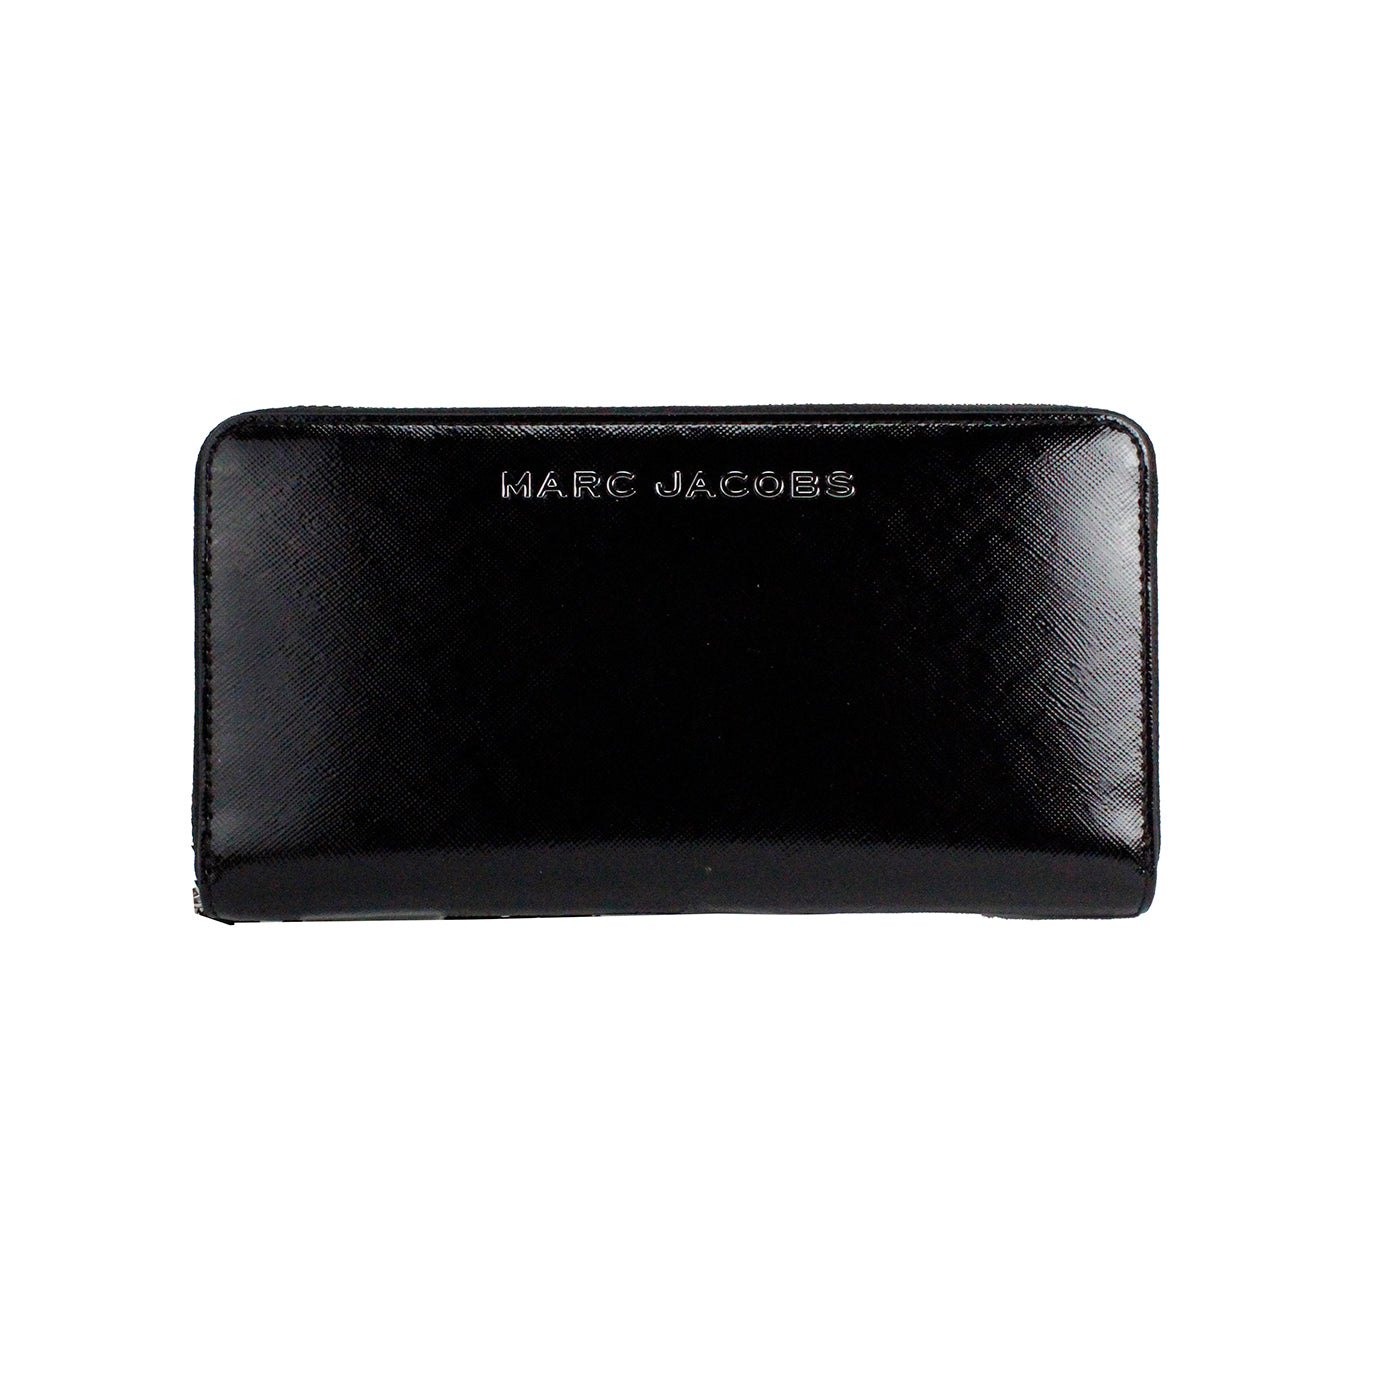 Marc Jacobs Large Black Leather Continental Clutch Wallet